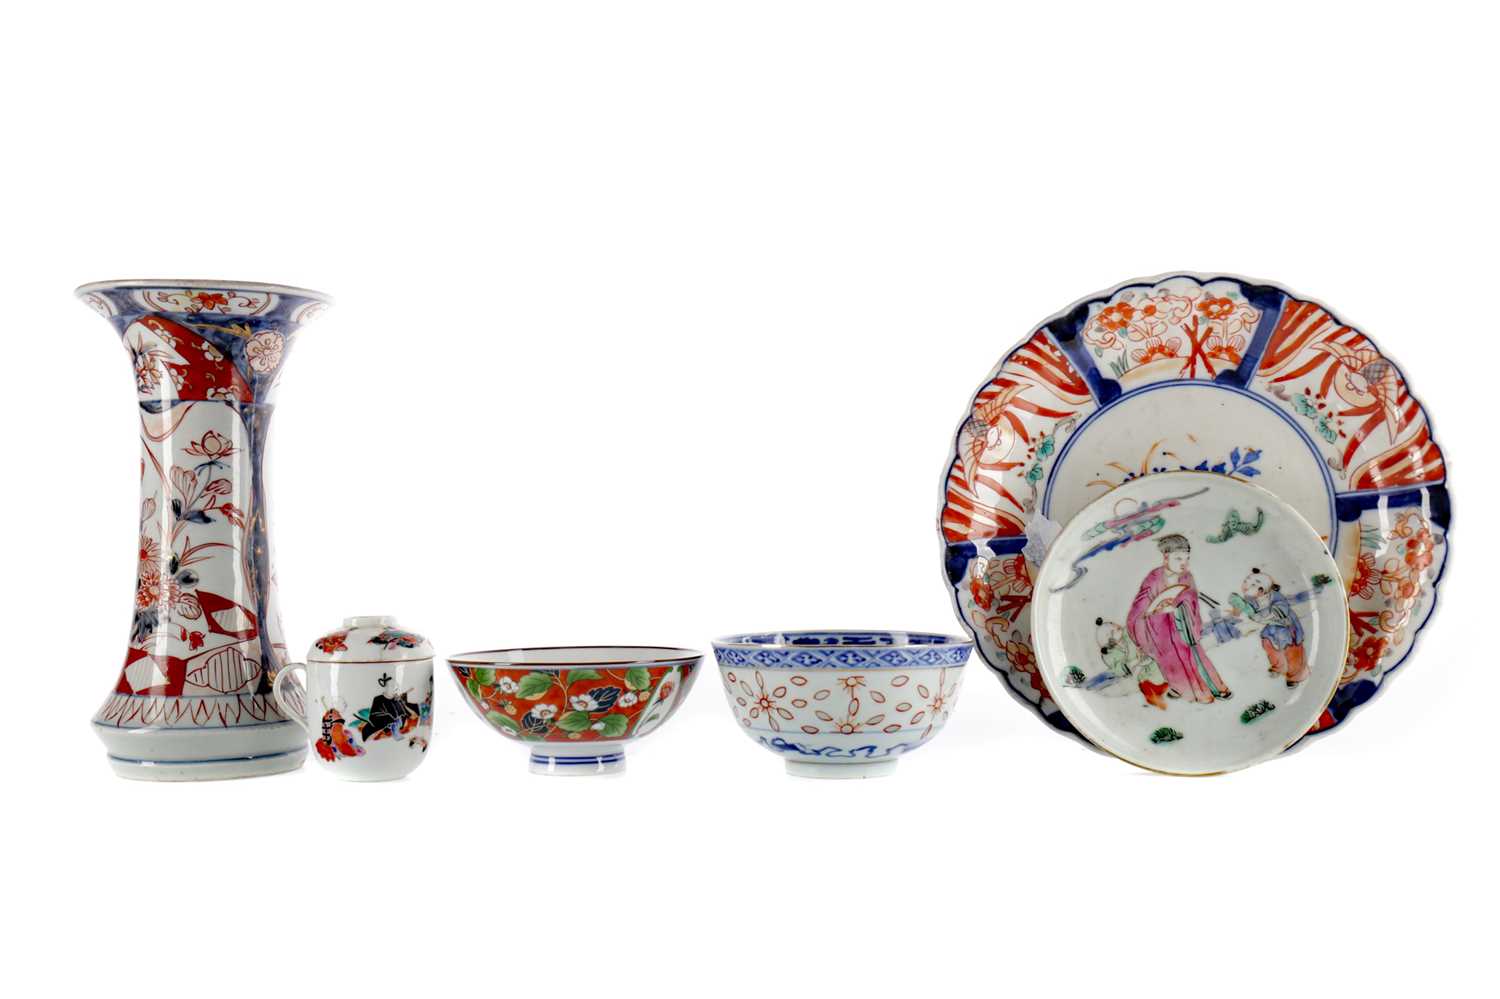 Lot 770 - A JAPANESE IMARI VASE, PLATES AND OTHER ITEMS